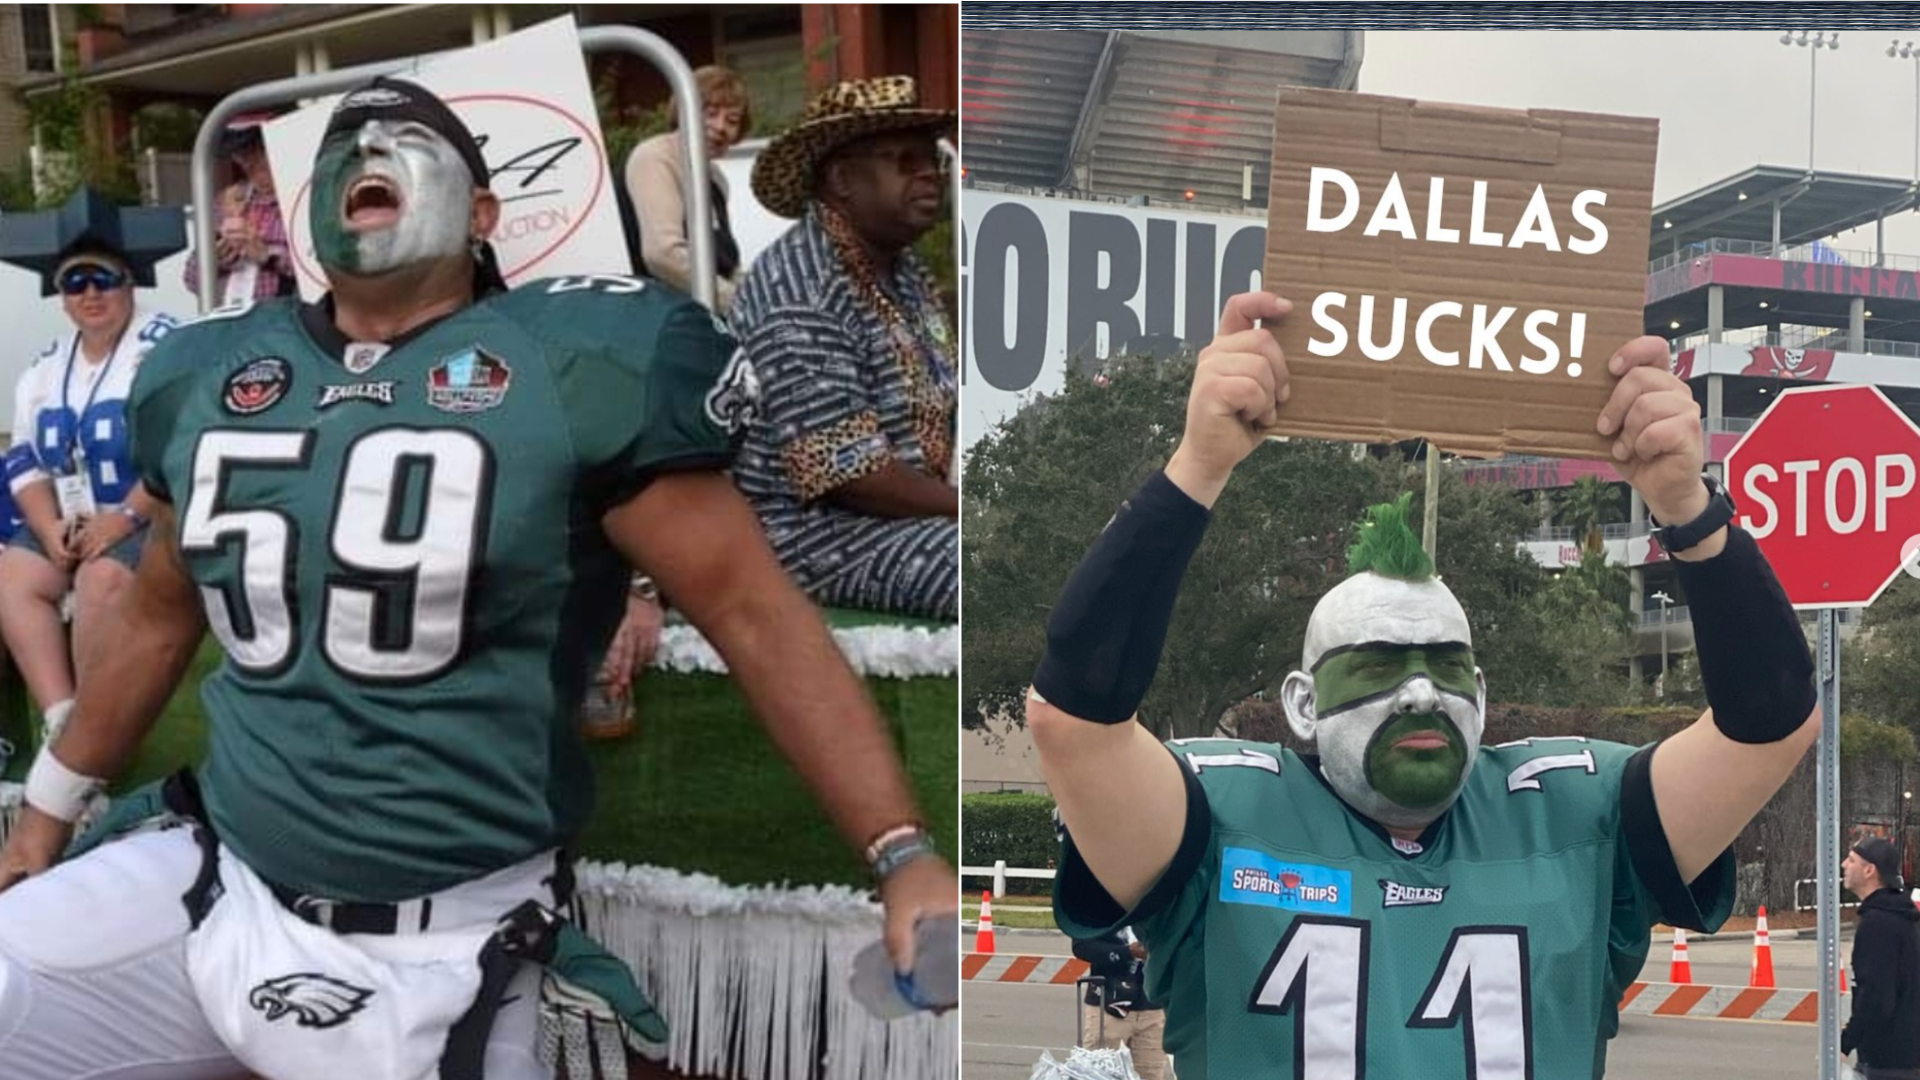 Shaun "Shoulder Pad Guy" Young, left; Philly Sports Guy, right, holding up a "Dallas Sucks" sign.